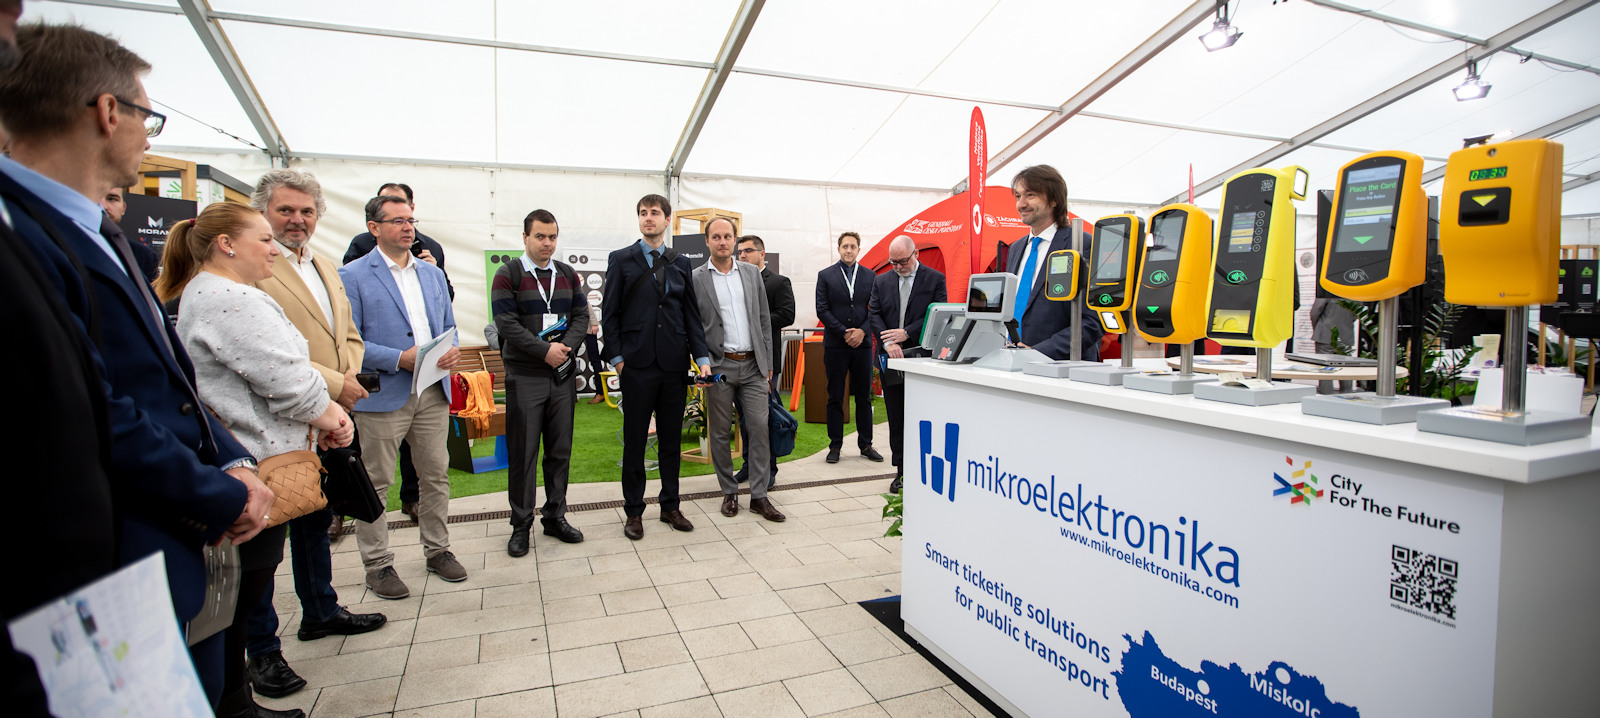 Mikroelektronika became a part of City for the Future